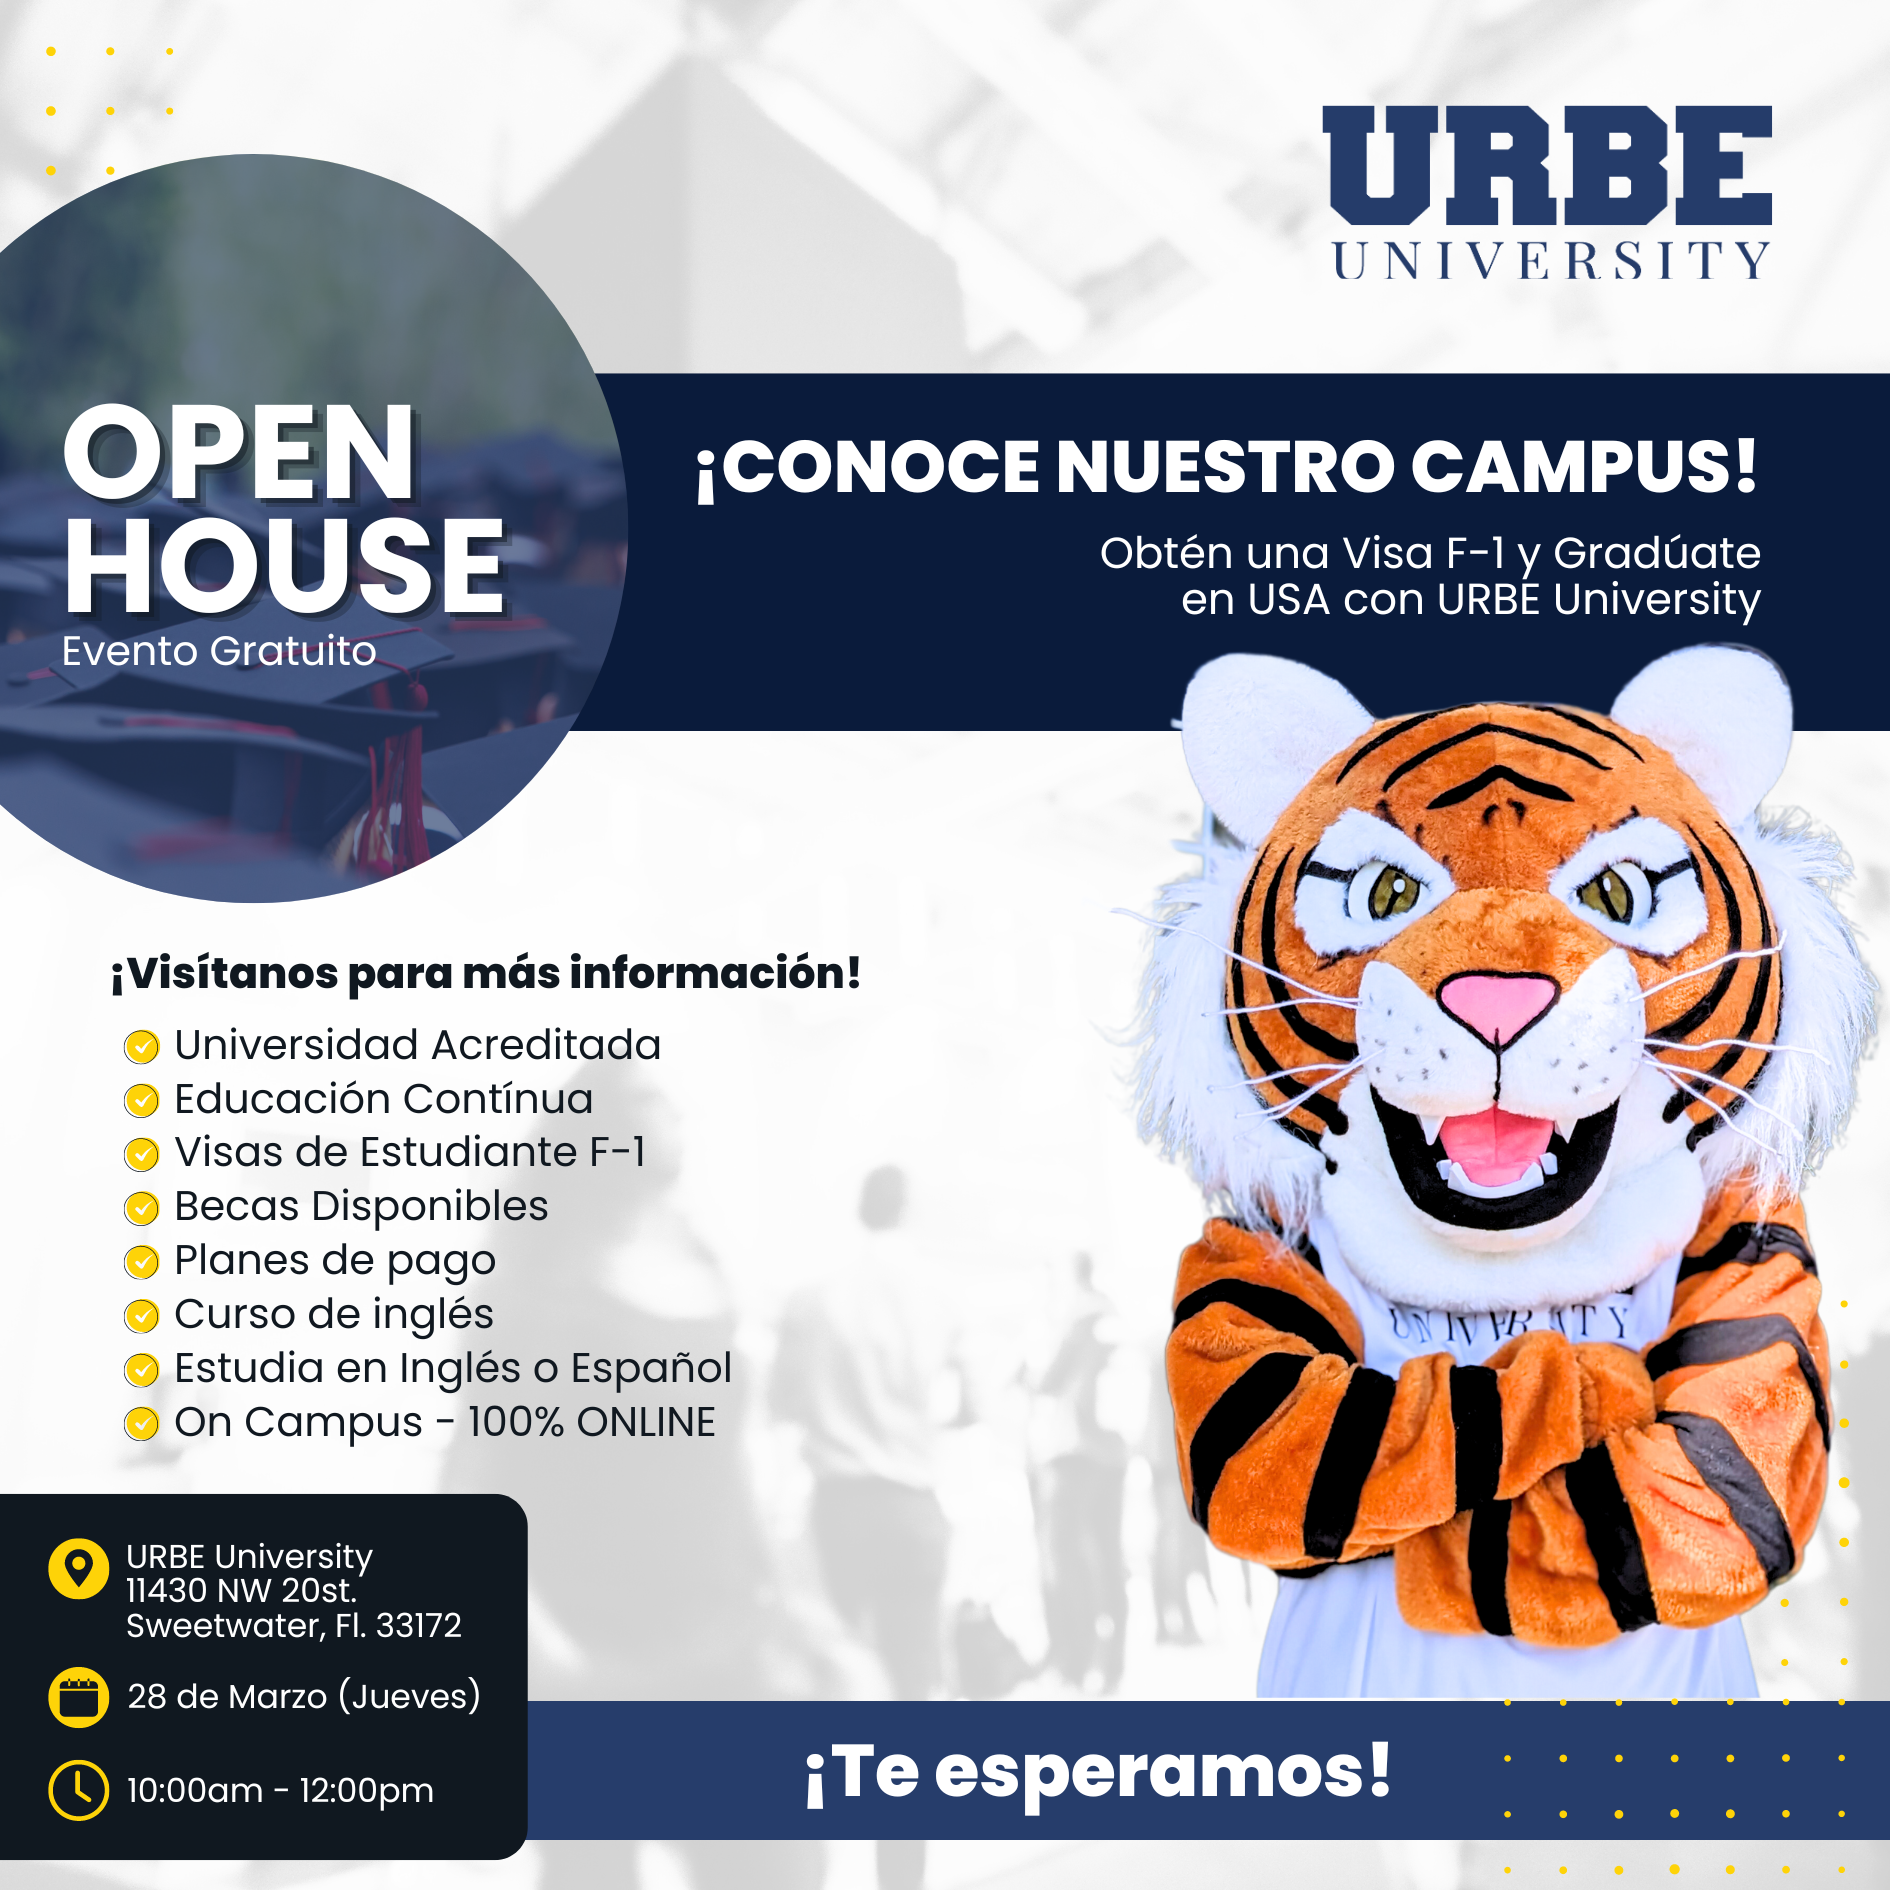 URBE University Explore our undergraduate and graduate programs in business, communications, education and more.